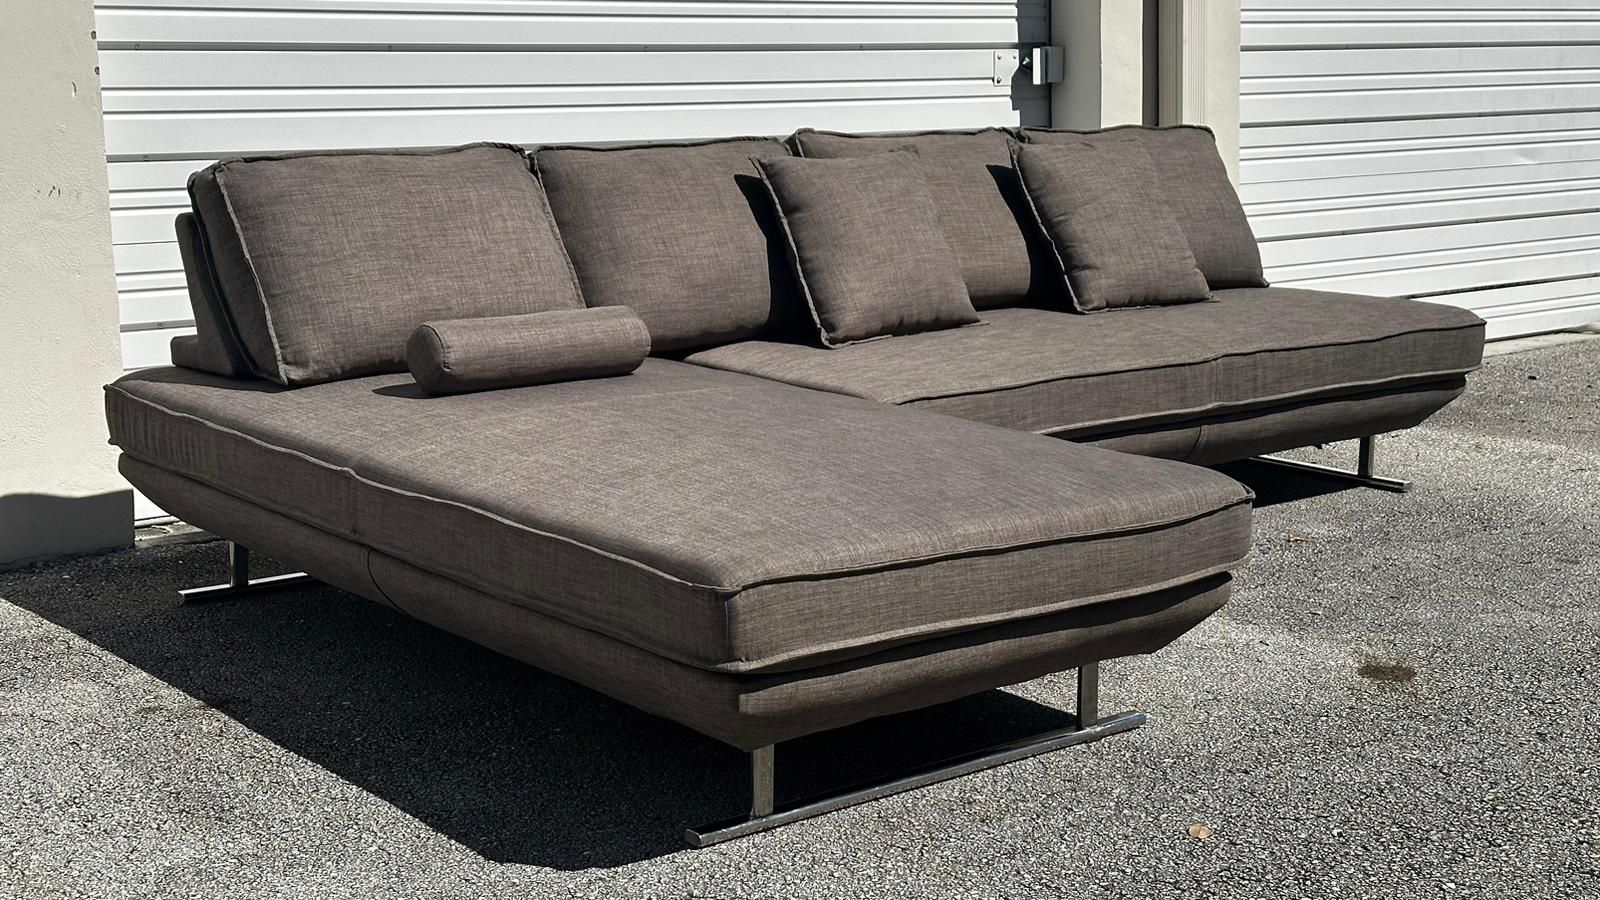 MODERN MODULAR SECTIONAL SOFA BED CHAISE LOUGE - delivery is negotiable